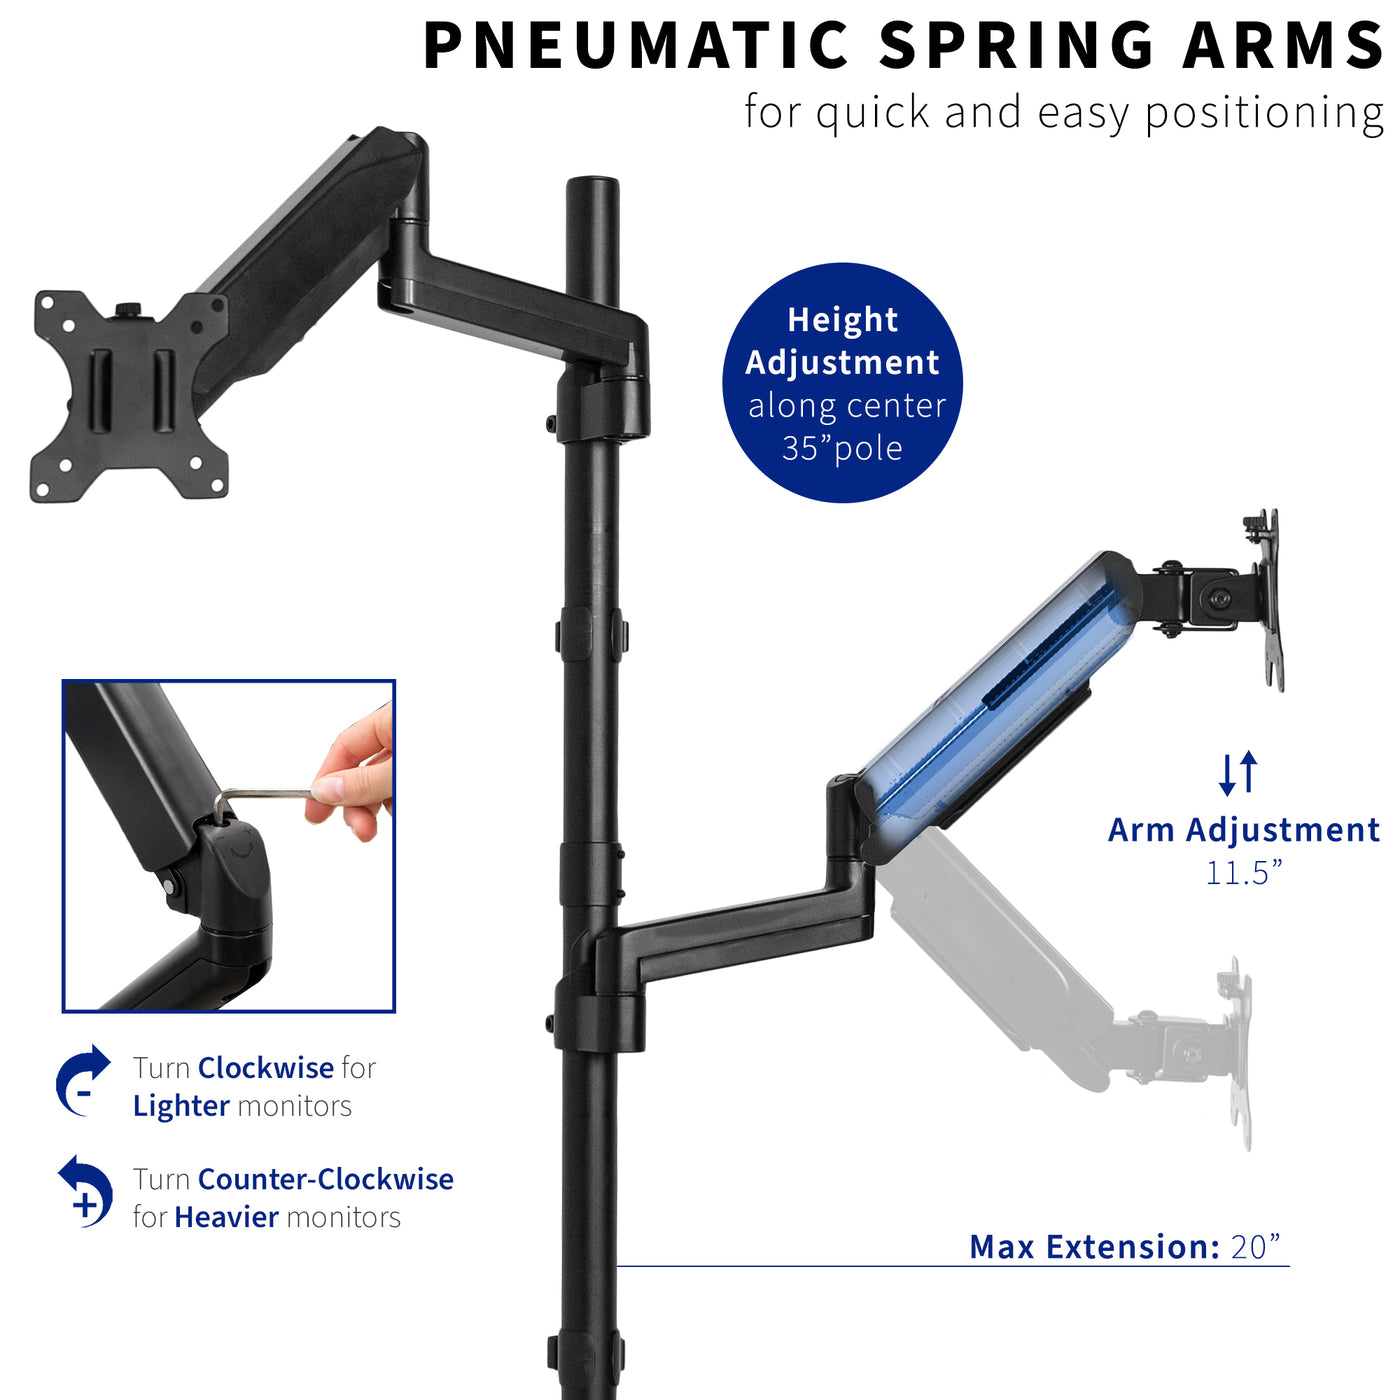 Adjustable pneumatic arm dual monitor extra tall desk mount.